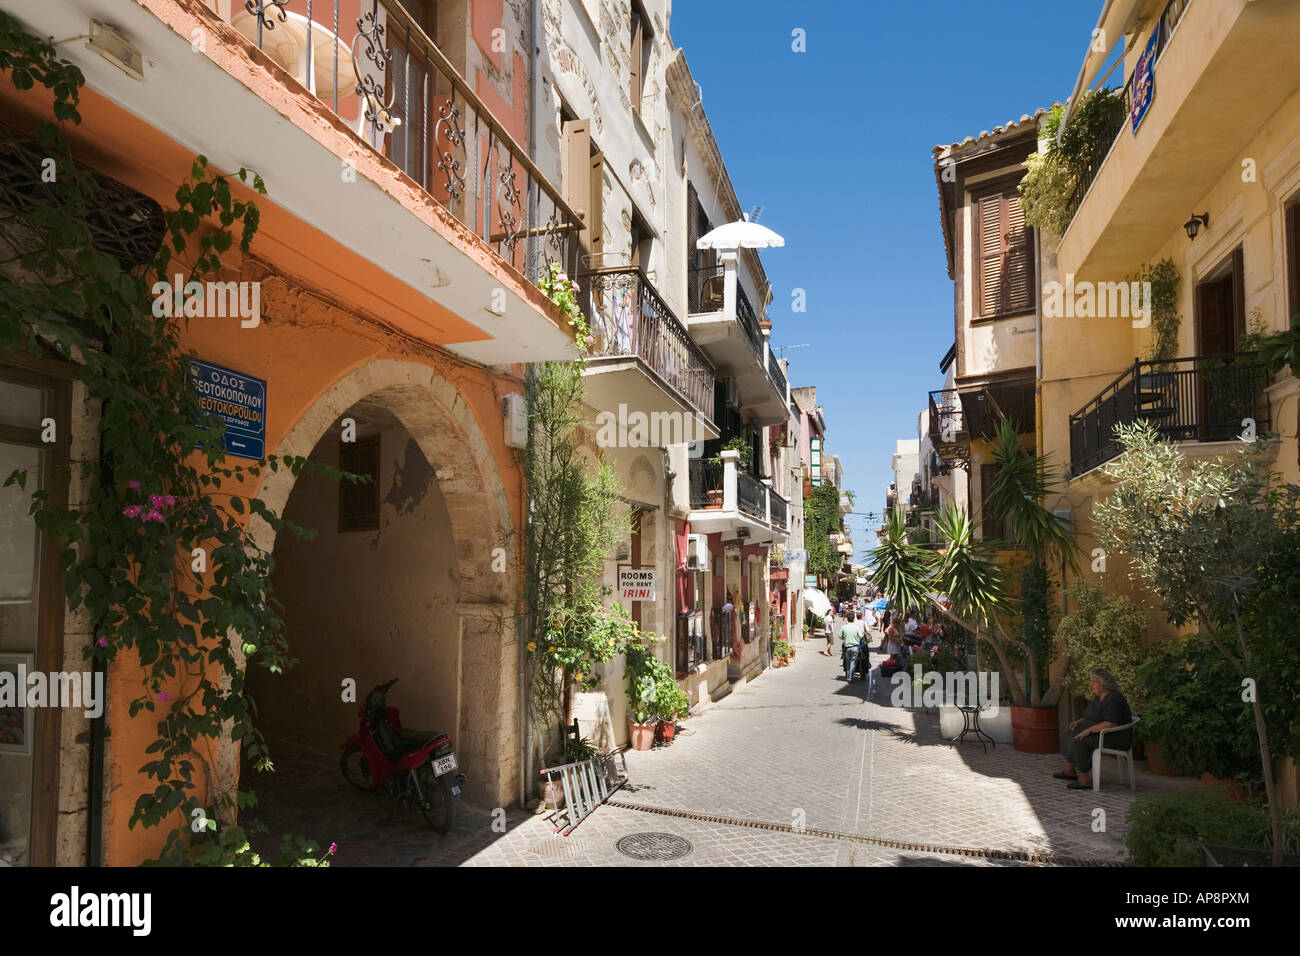 Typical Street in Old Town, Chania, North West Coast, Crete, Greece Stock Photo